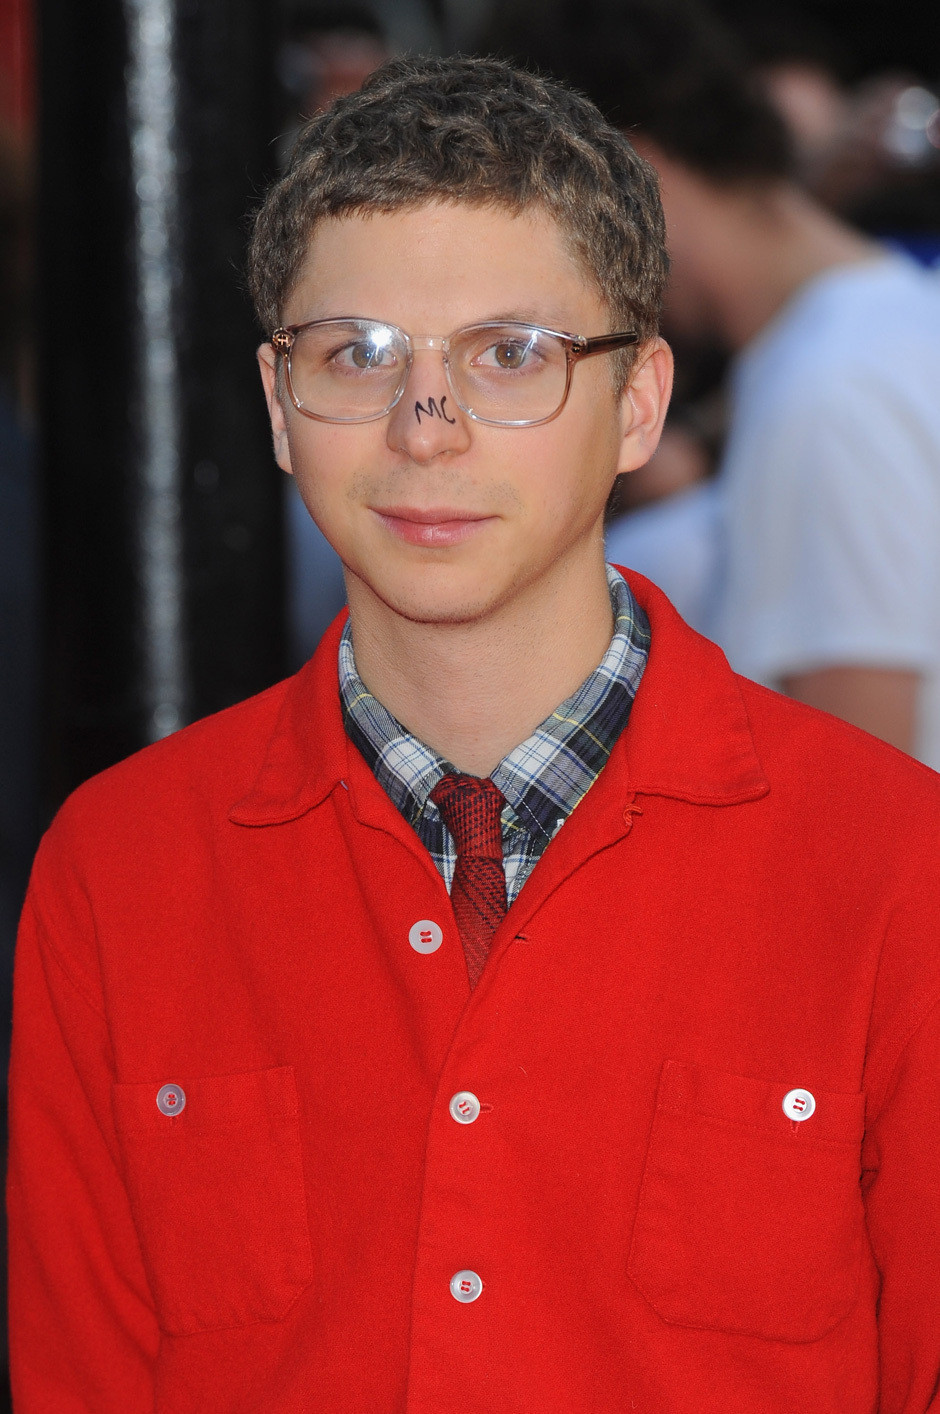 Michael Cera Wears Pen On His Face For London Premiere (PHOTO) HuffPost Entertainment